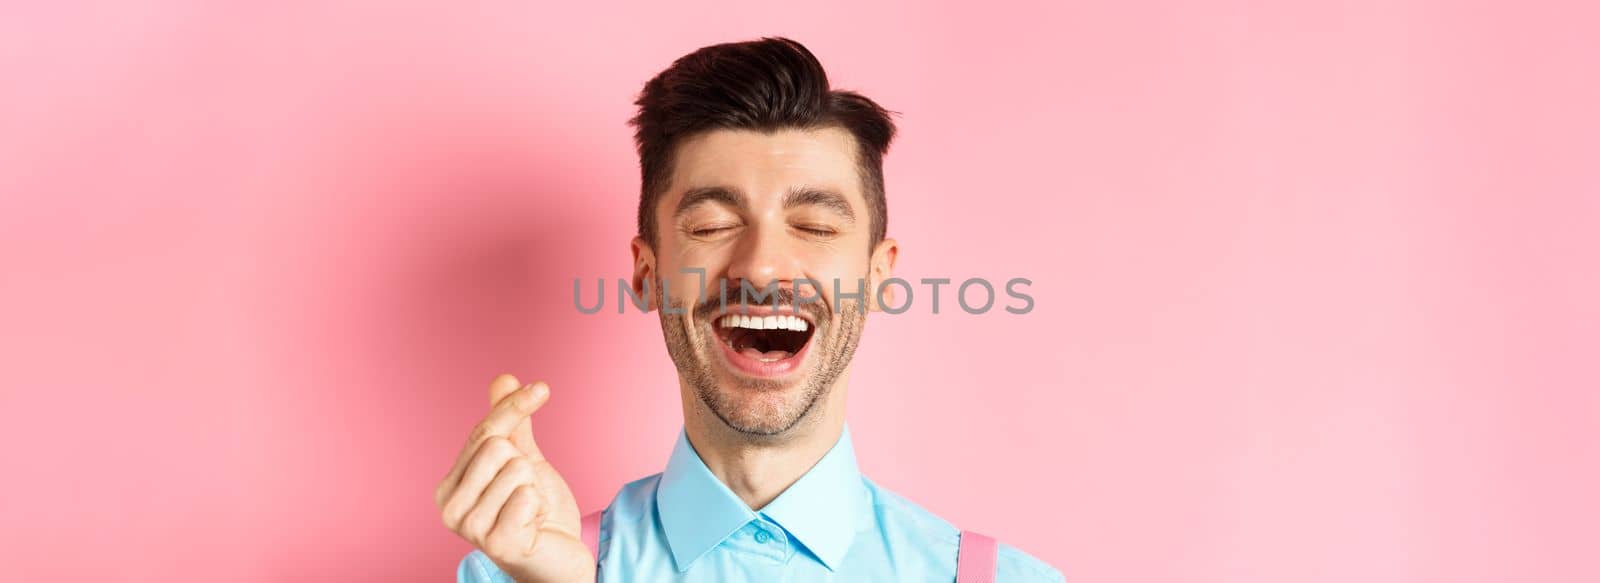 Valentines day concept. Happy man in love showing finger heart and laughing, standing on romantic pink background.